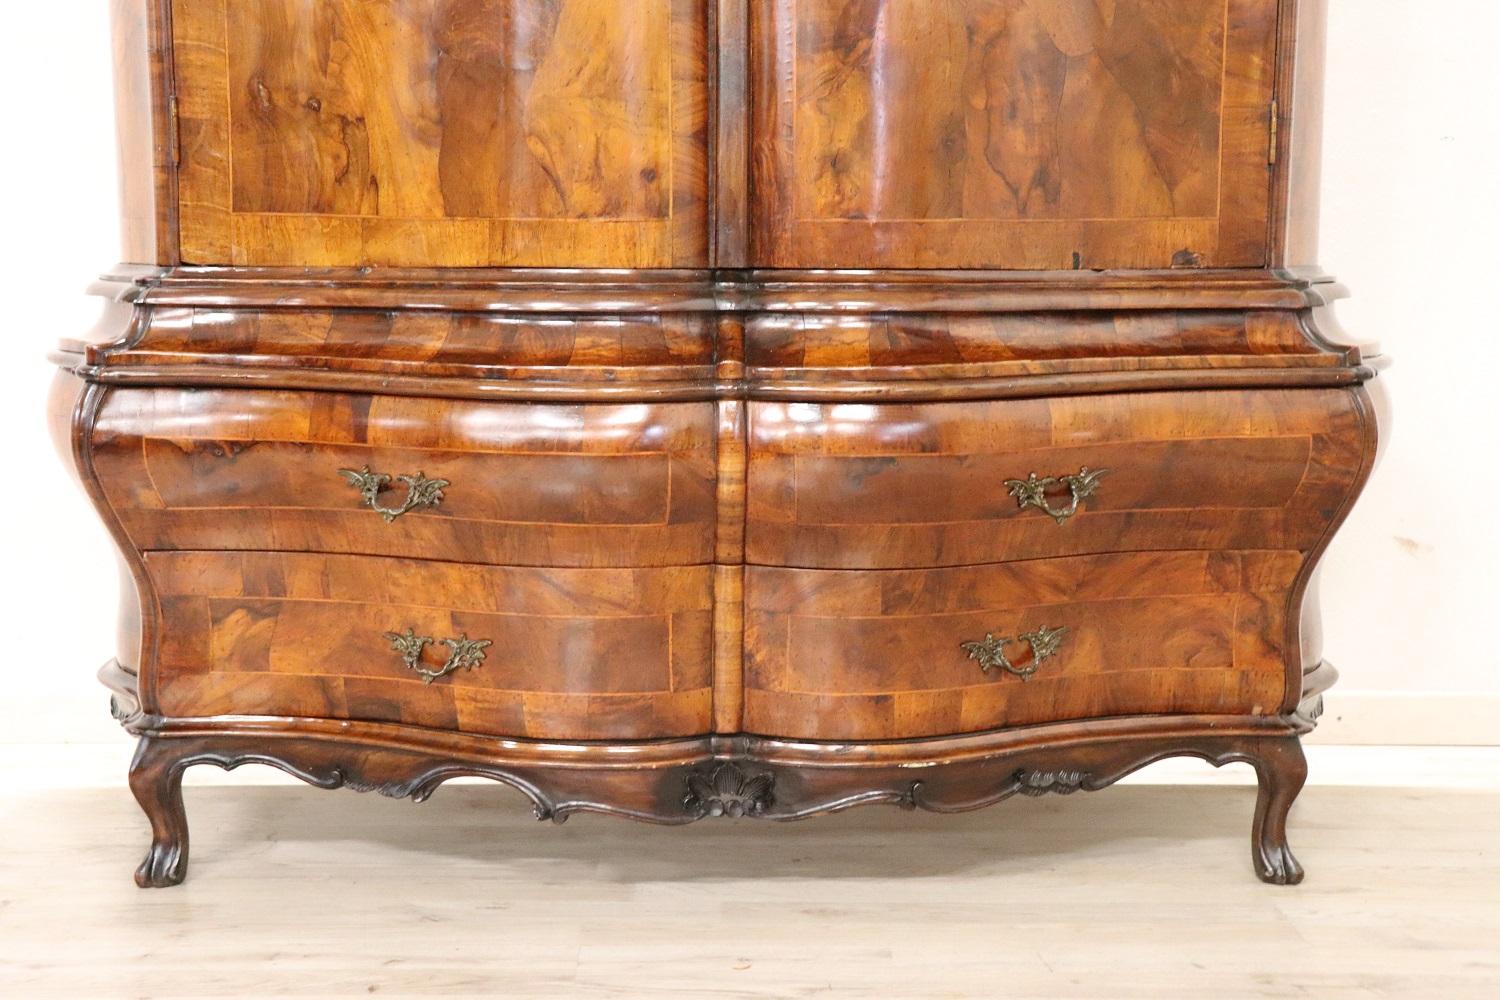 Rare early 20th century Italian Venetian Louis XV style wardrobe, 1910s. Particular rounded and wavy shape. Made of fine walnut burl. Equipped with two drawers. Equipped with a stick for hanging clothes. Very elegant perfect for refined environments.